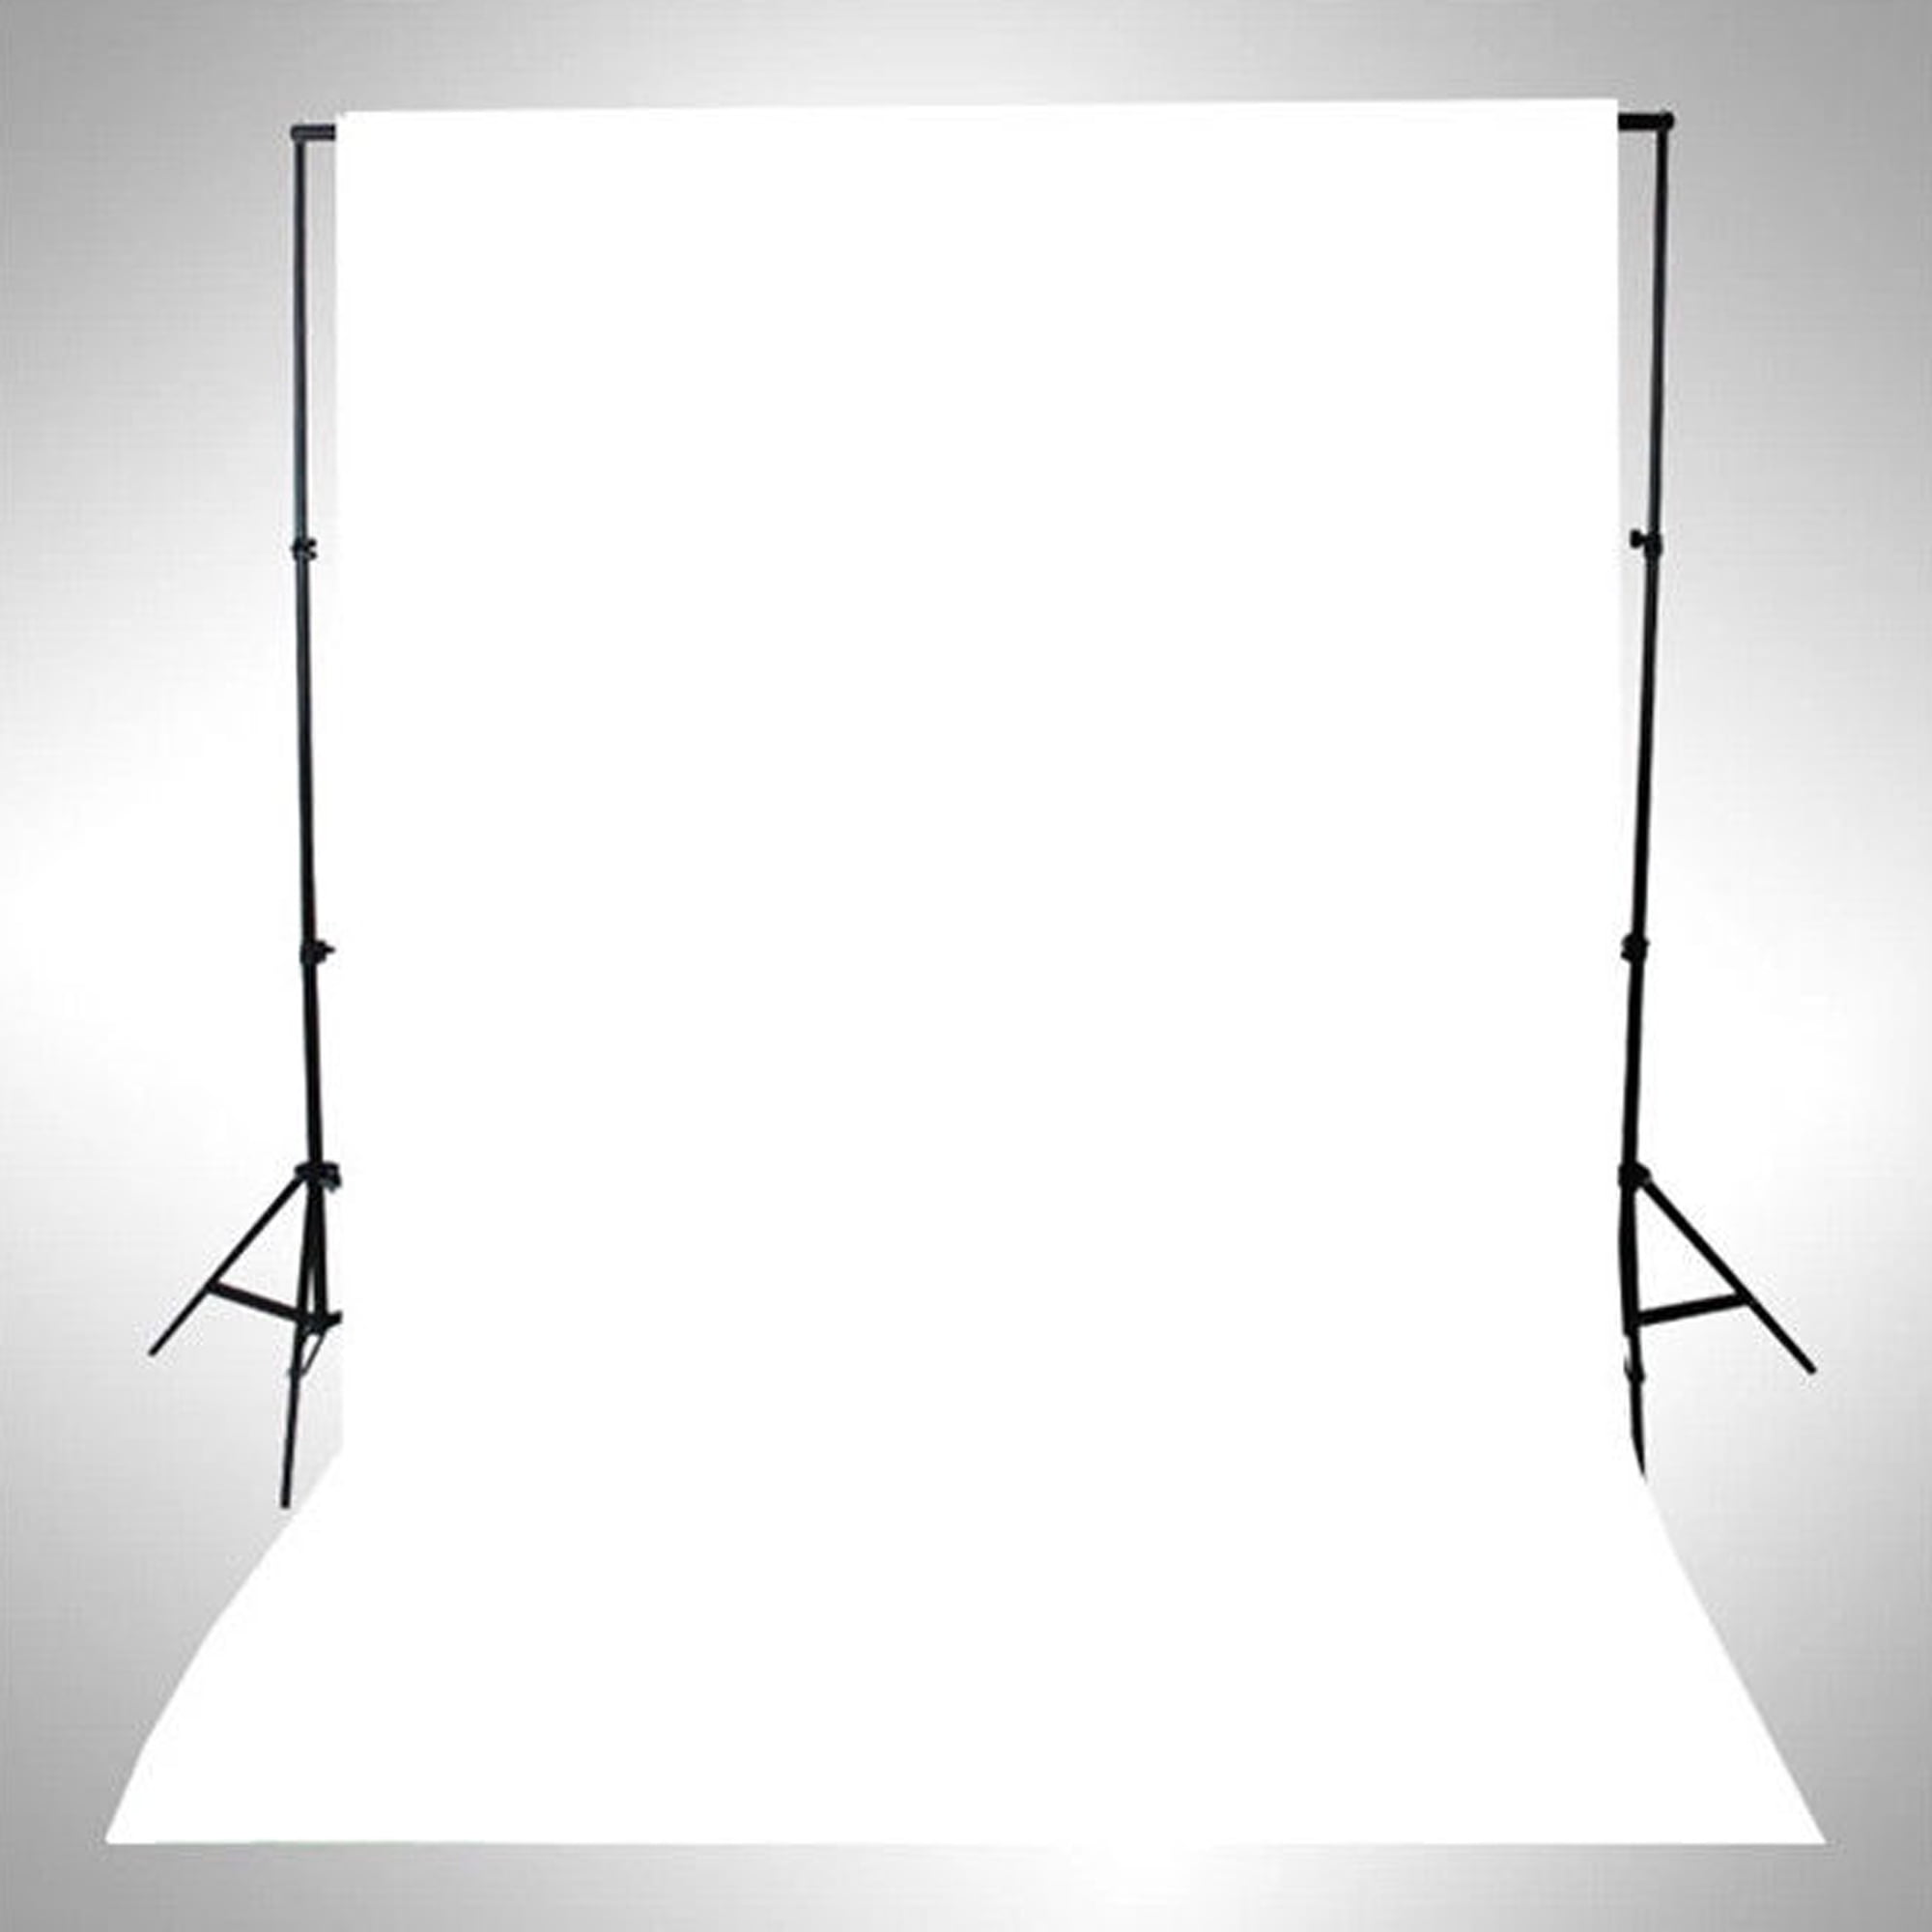 Buy 3x5ft Studio Photo Video Photography Backdrops White Solid ...